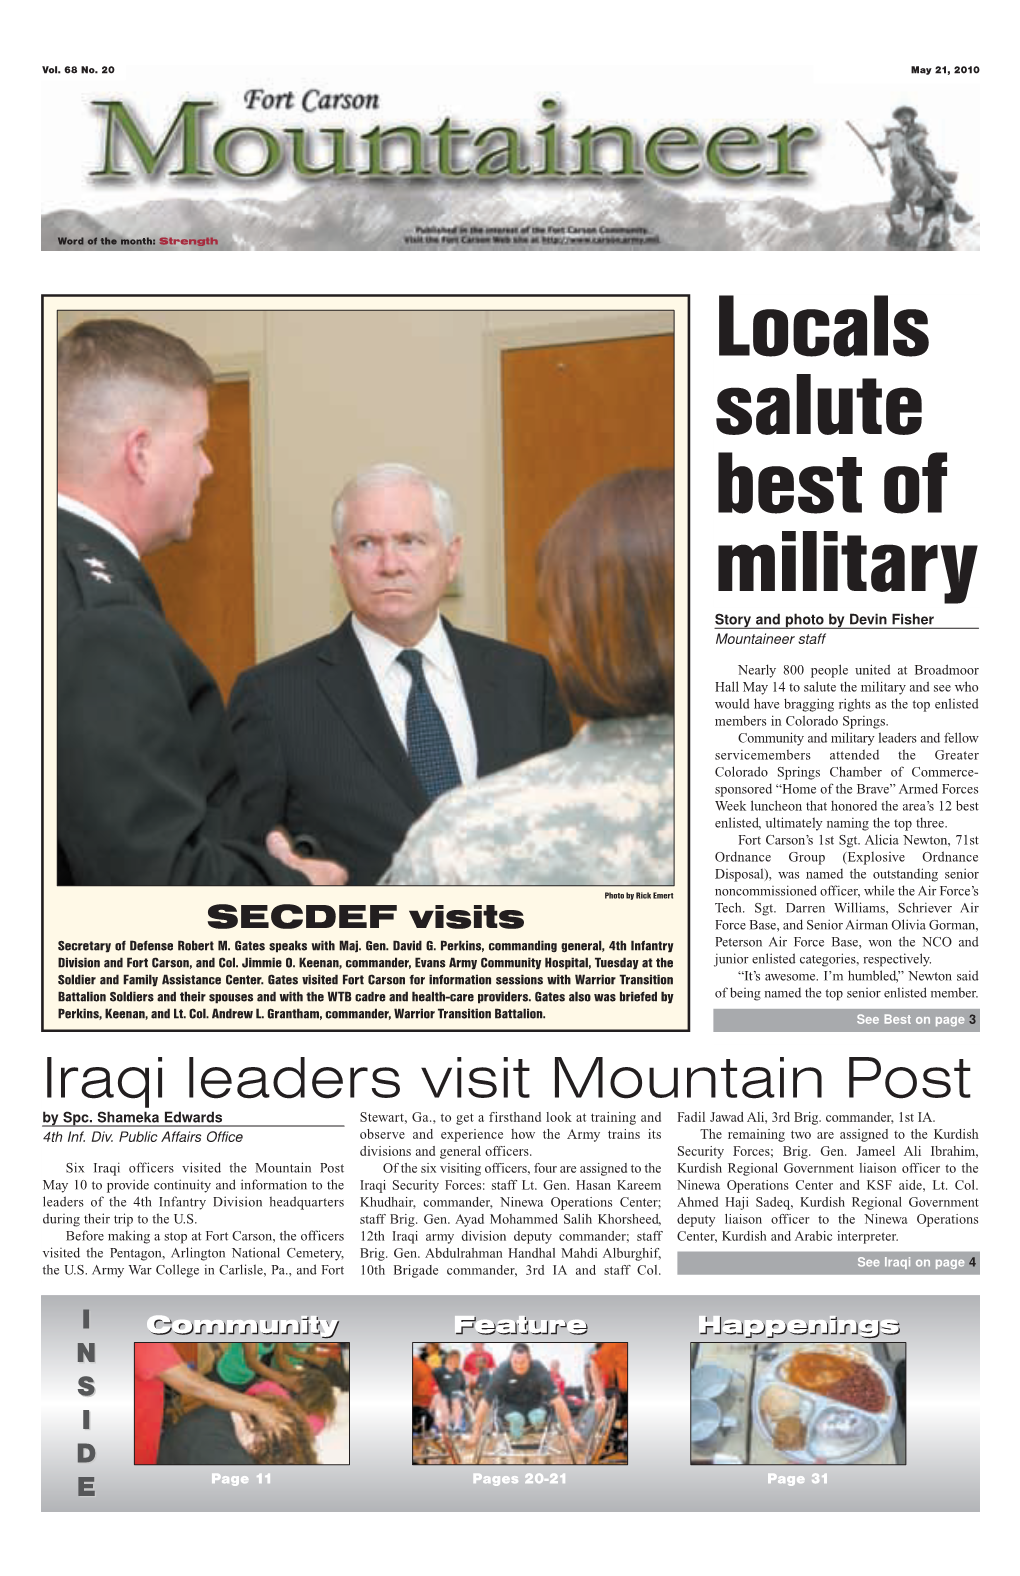 Iraqi Leaders Visit Mountain Post by Spc